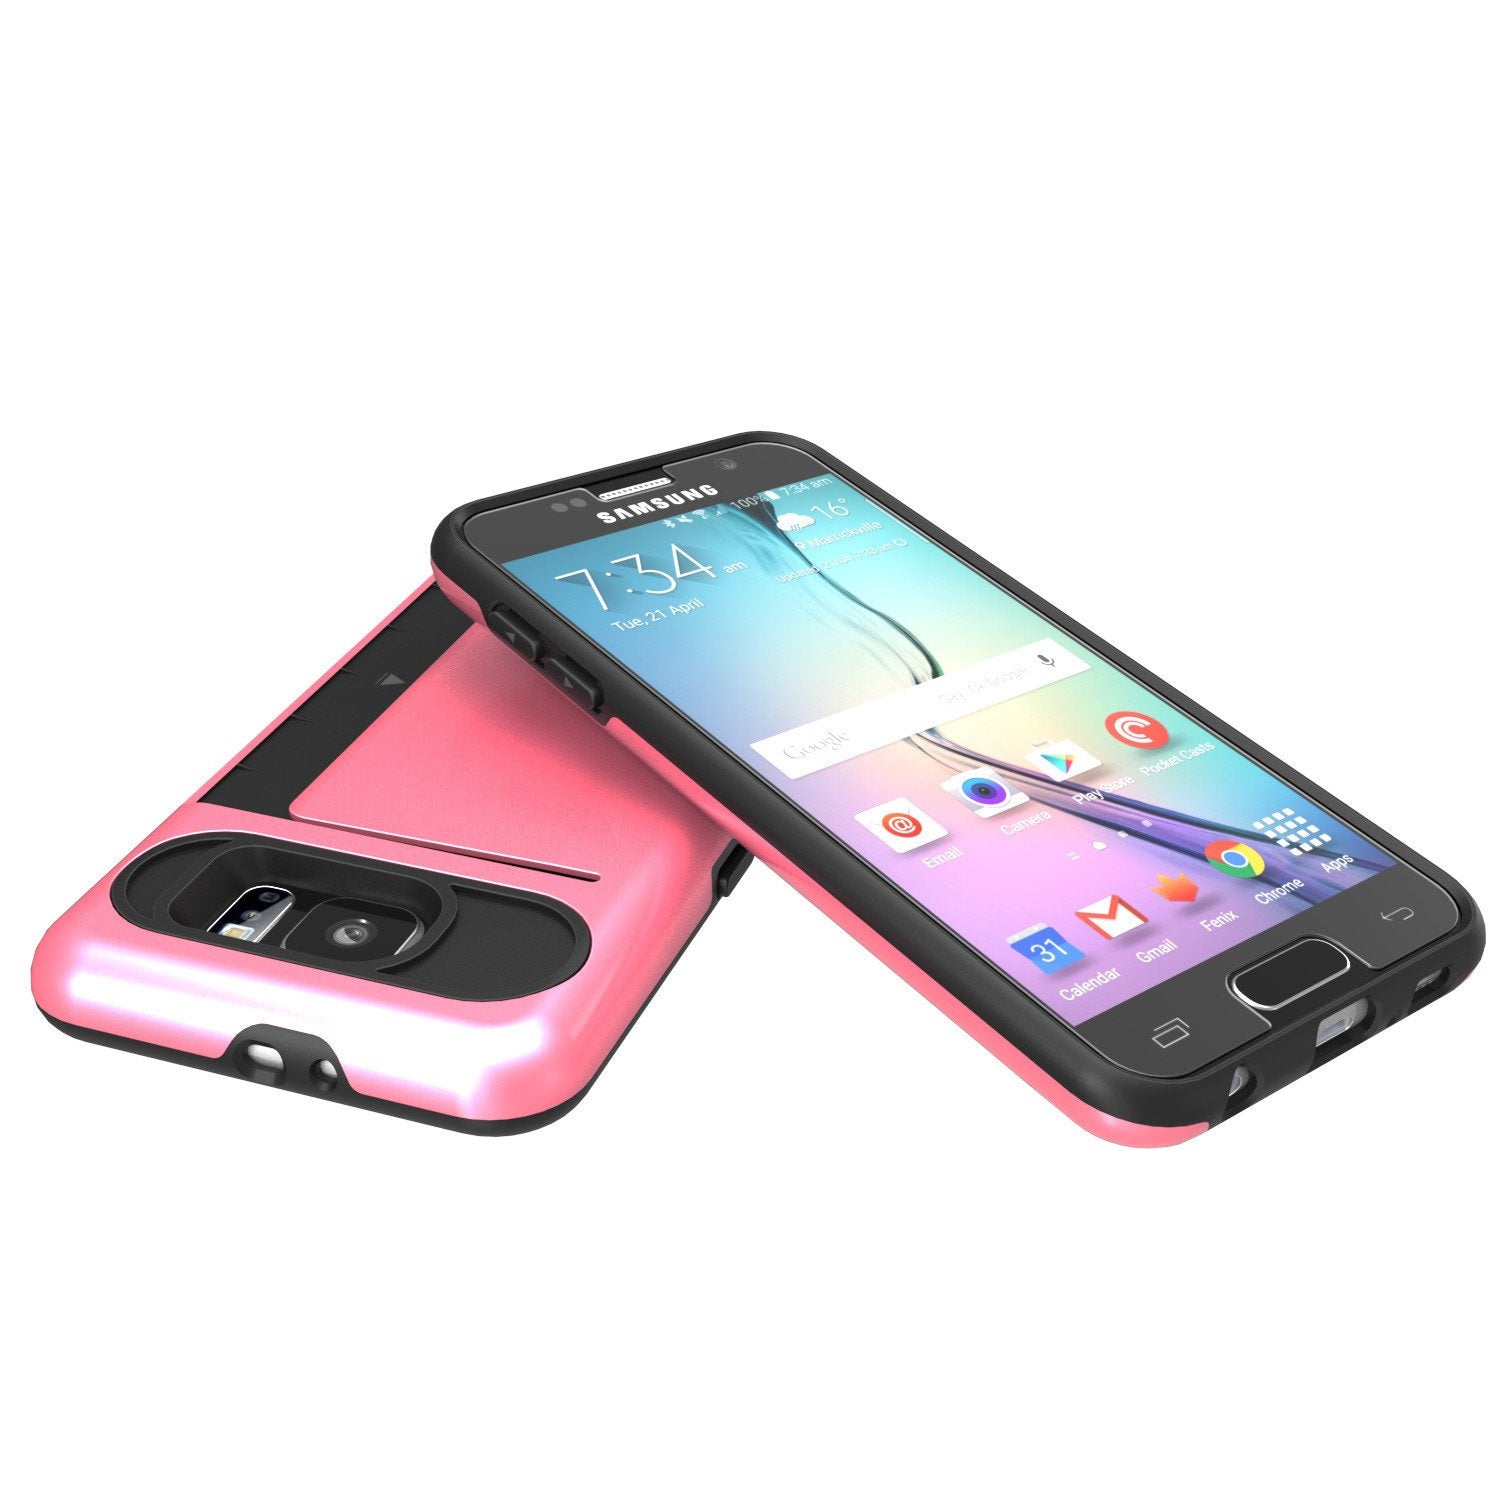 Galaxy S6 EDGE Case PunkCase CLUTCH Pink Series Slim Armor Soft Cover Case w/ Screen Protector - PunkCase NZ